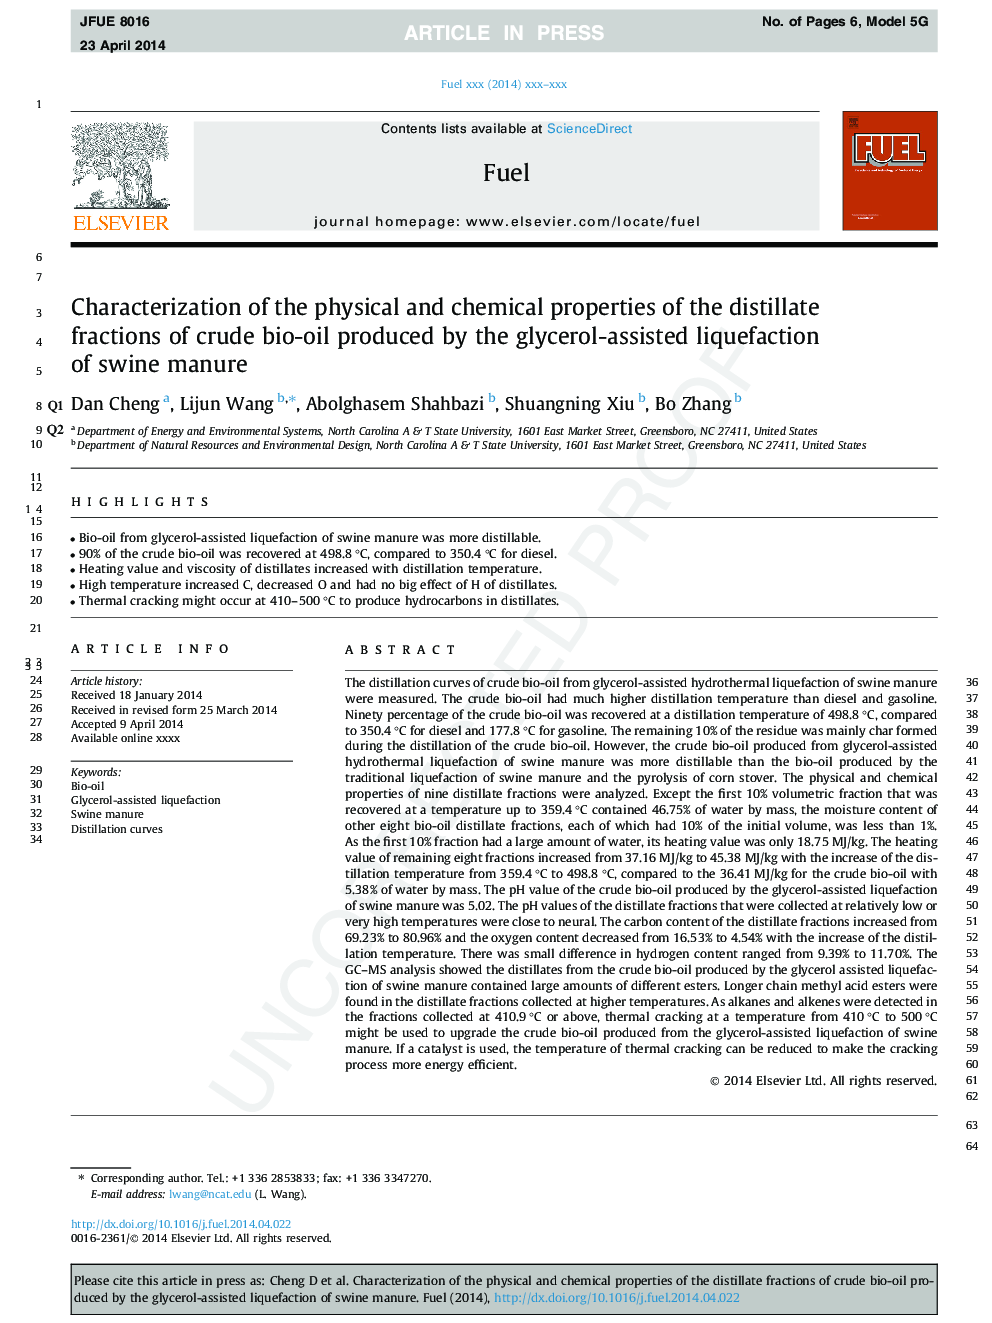 Characterization of the physical and chemical properties of the distillate fractions of crude bio-oil produced by the glycerol-assisted liquefaction of swine manure